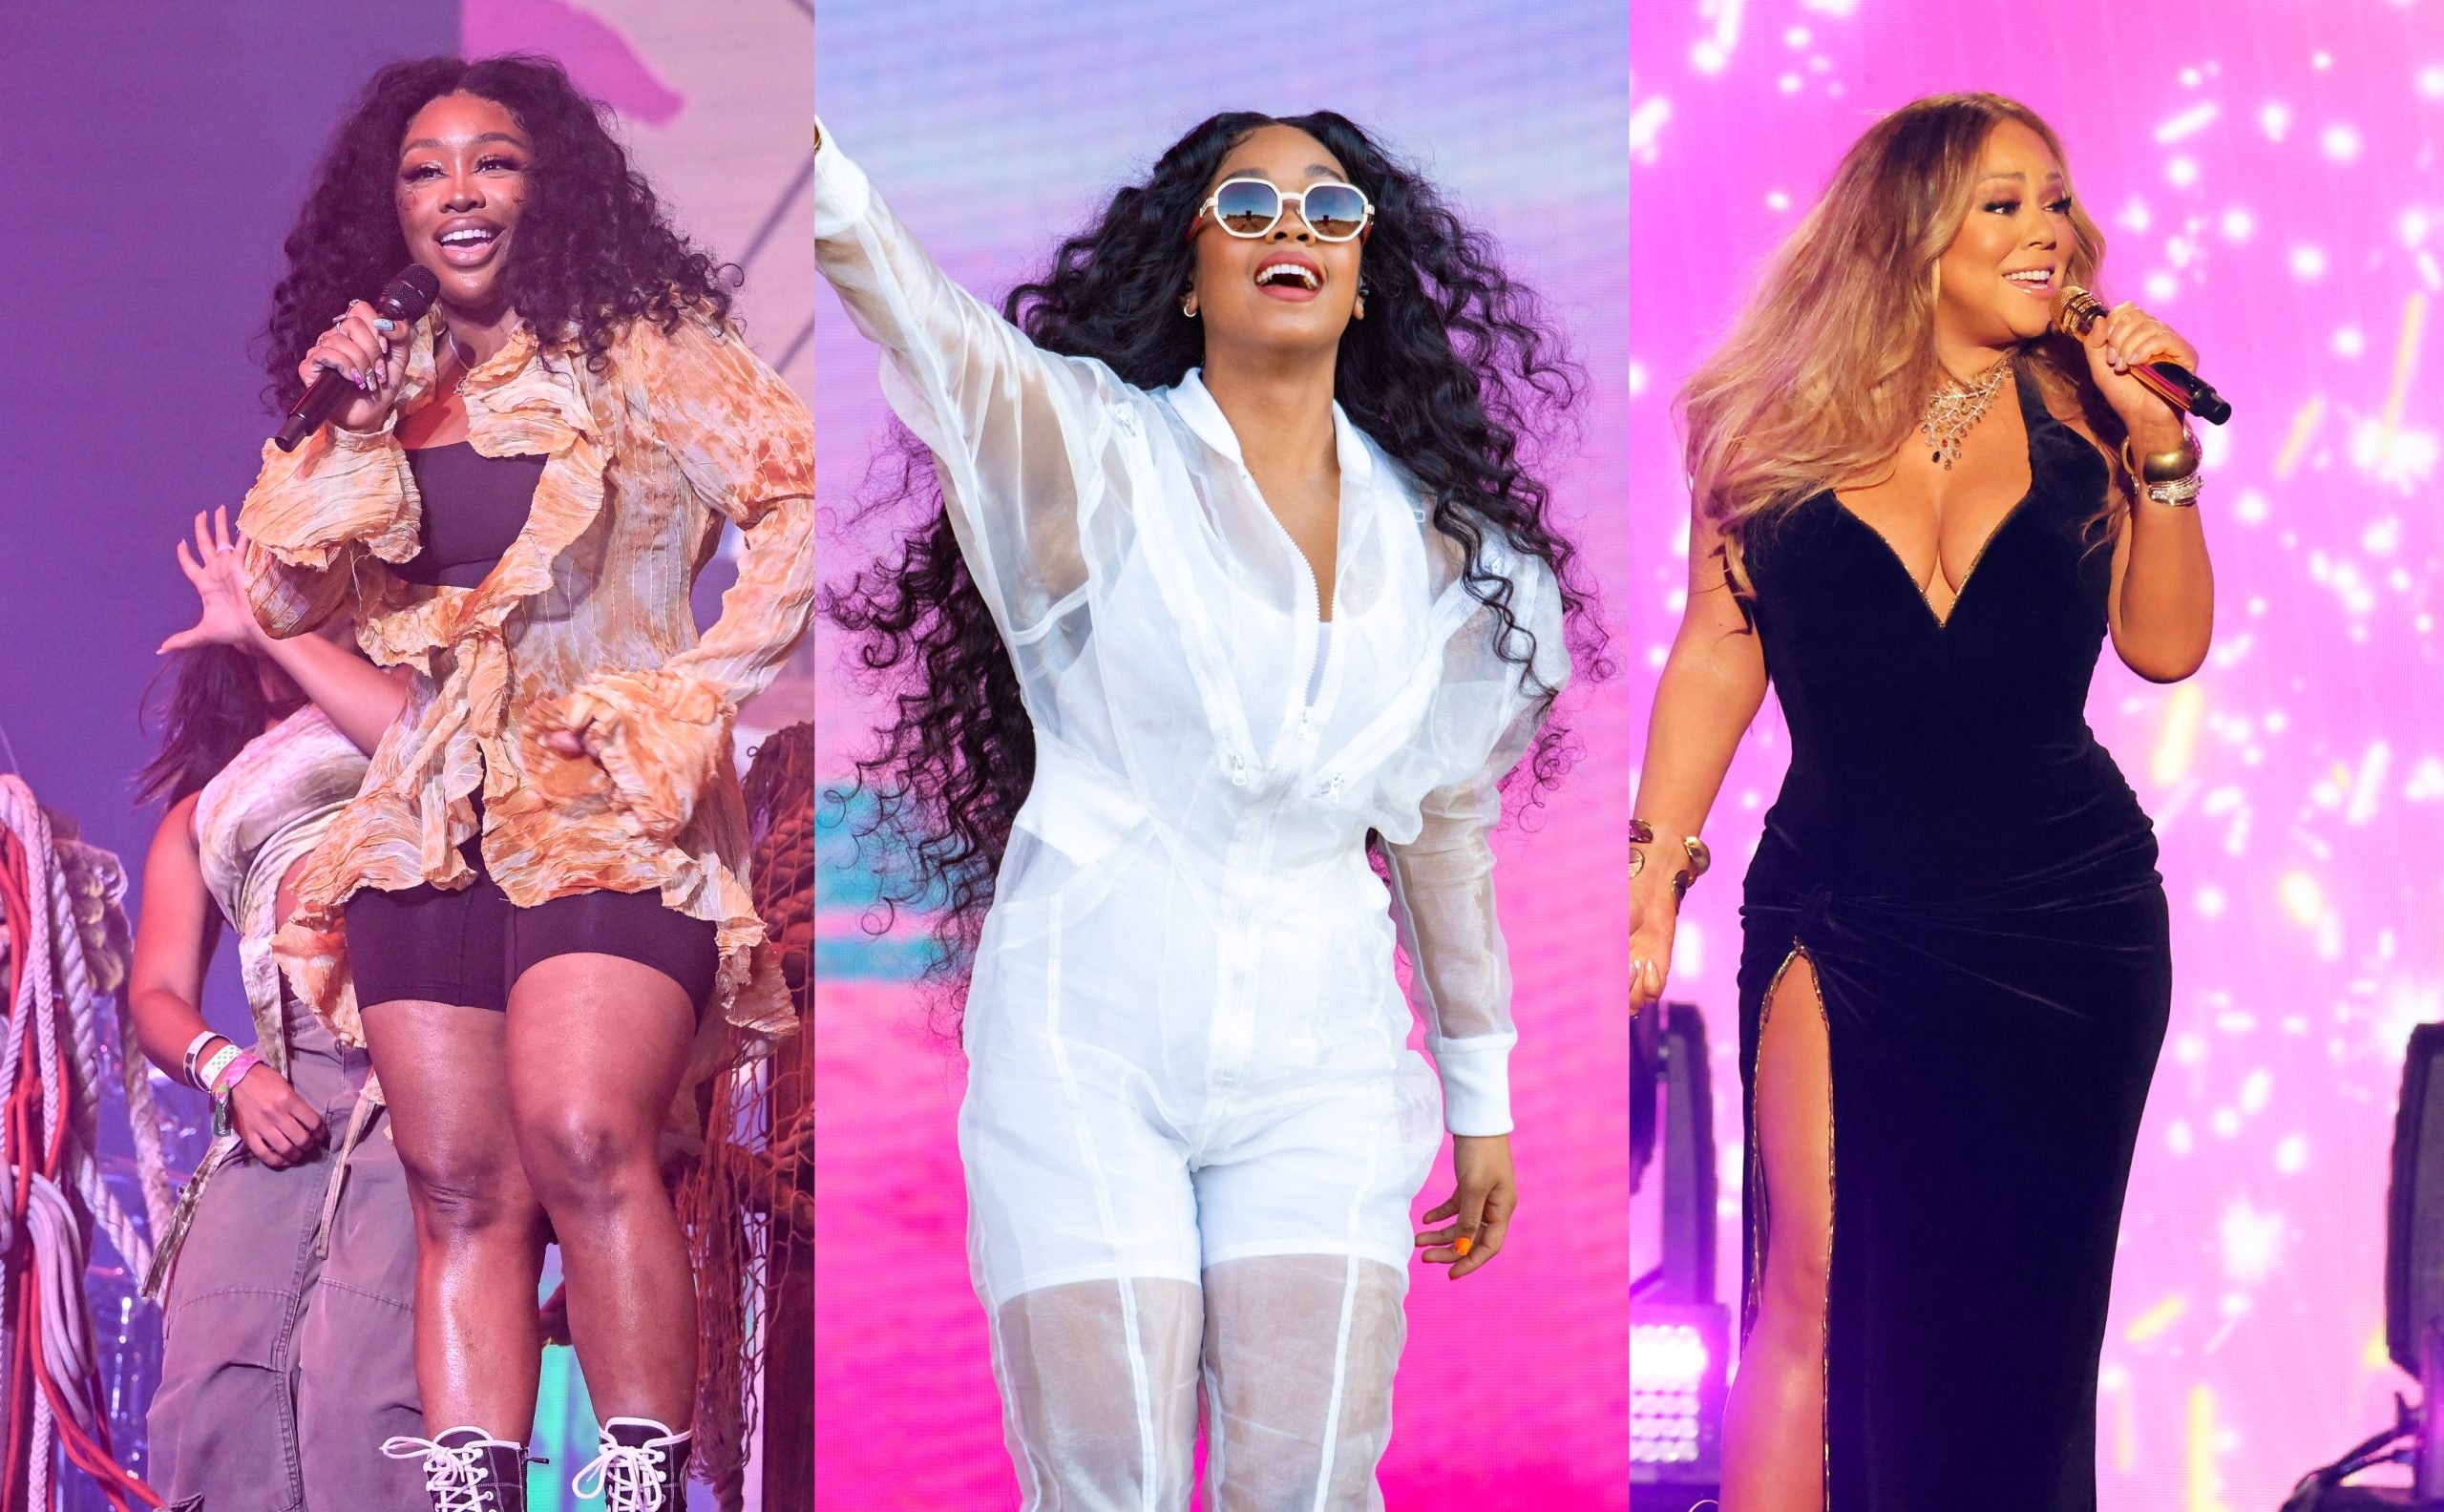 Mariah Carey, Usher, SZA, H.E.R. And More Set To Perform At The 2022 Global Citizen Festival